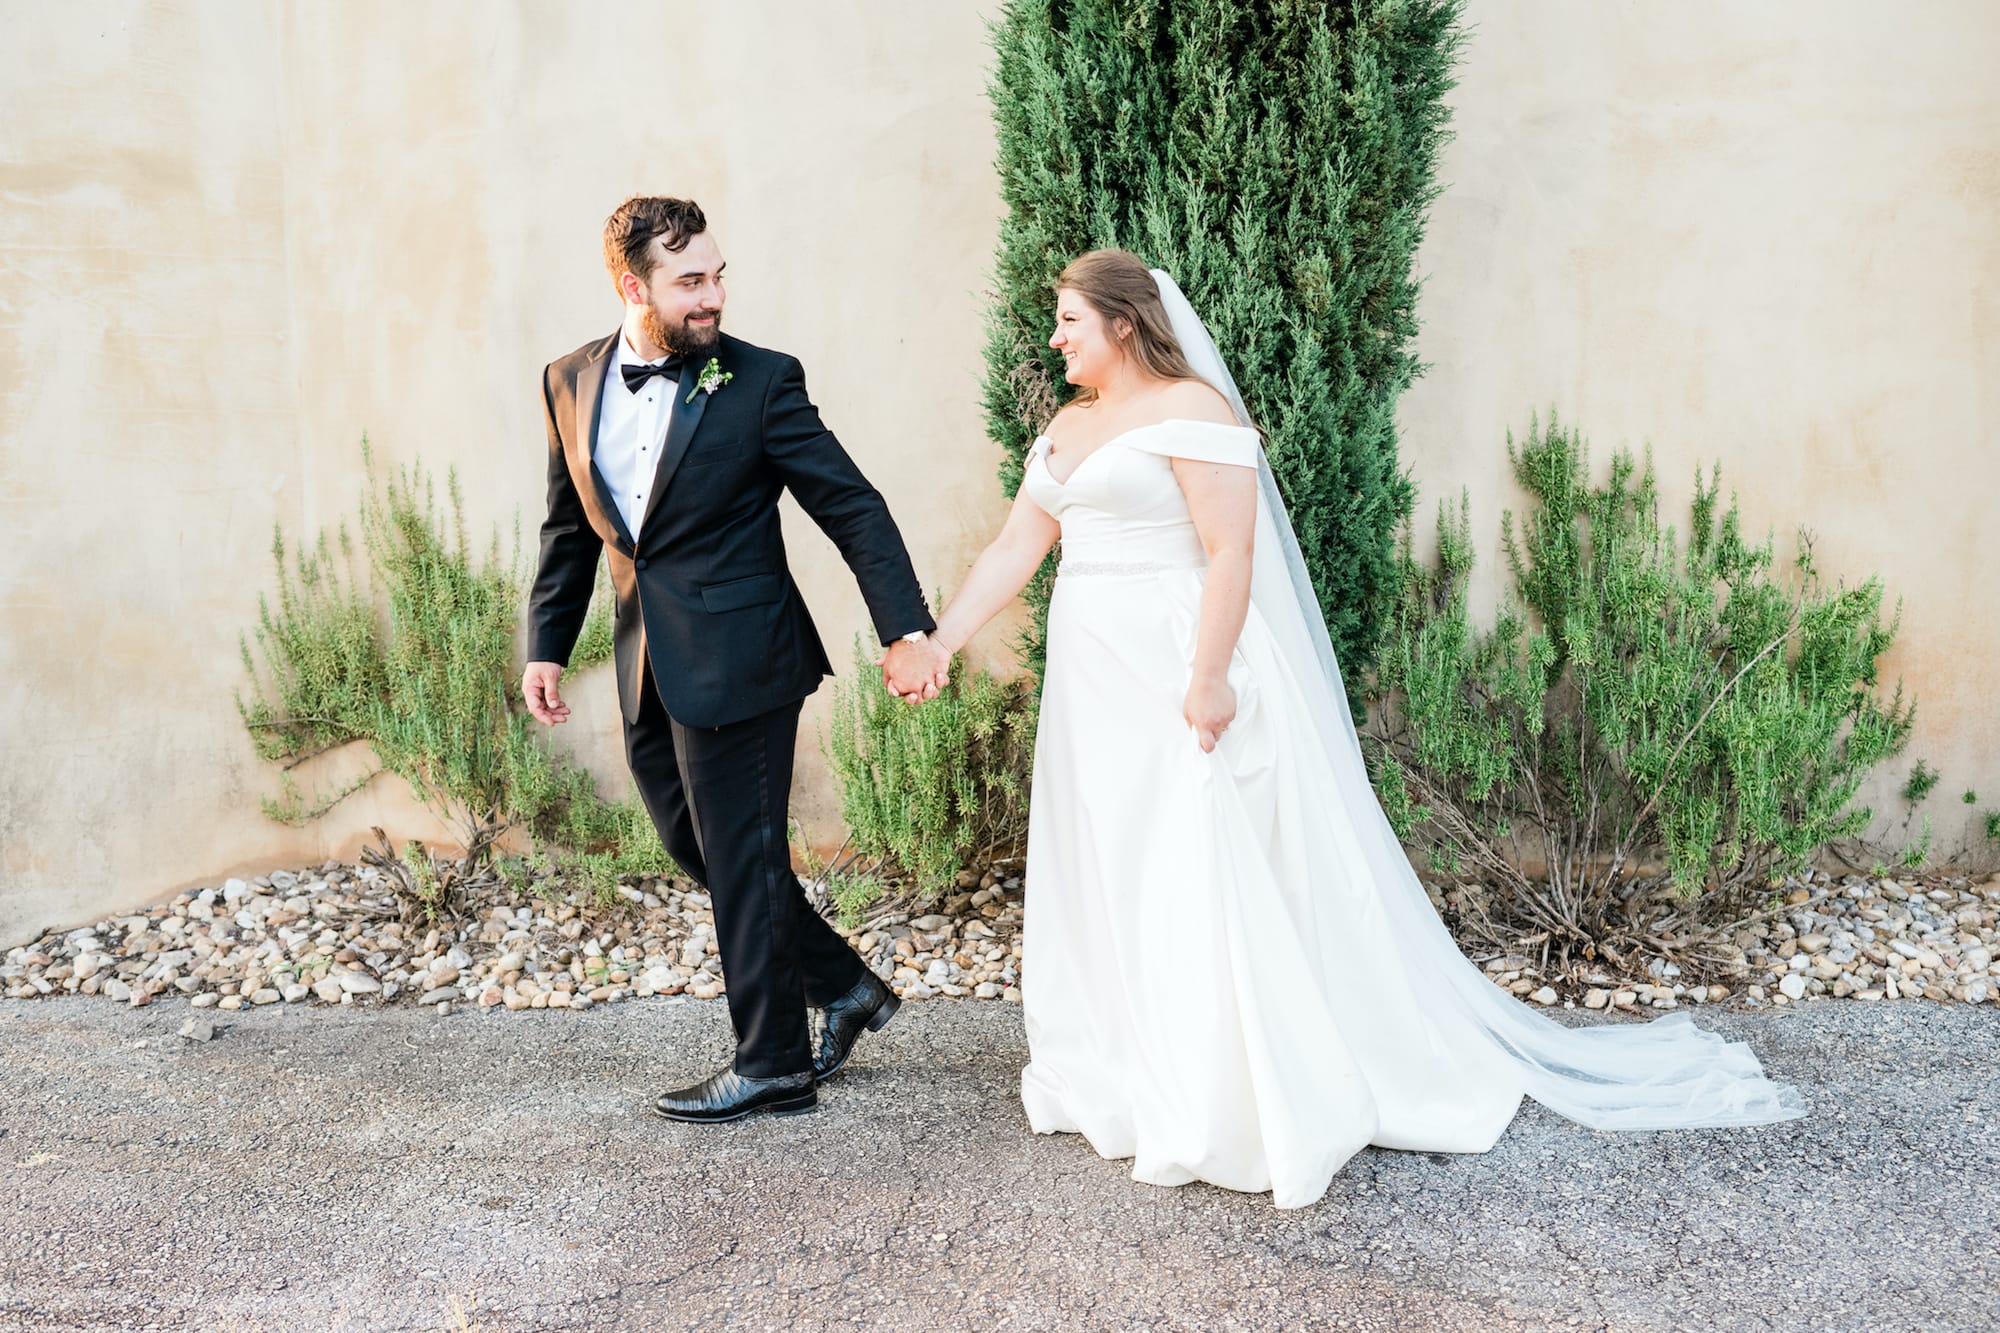 Montaluce winery and reaurant, montaluce winery wedding, elli row photography, bright and airy wedding photographer